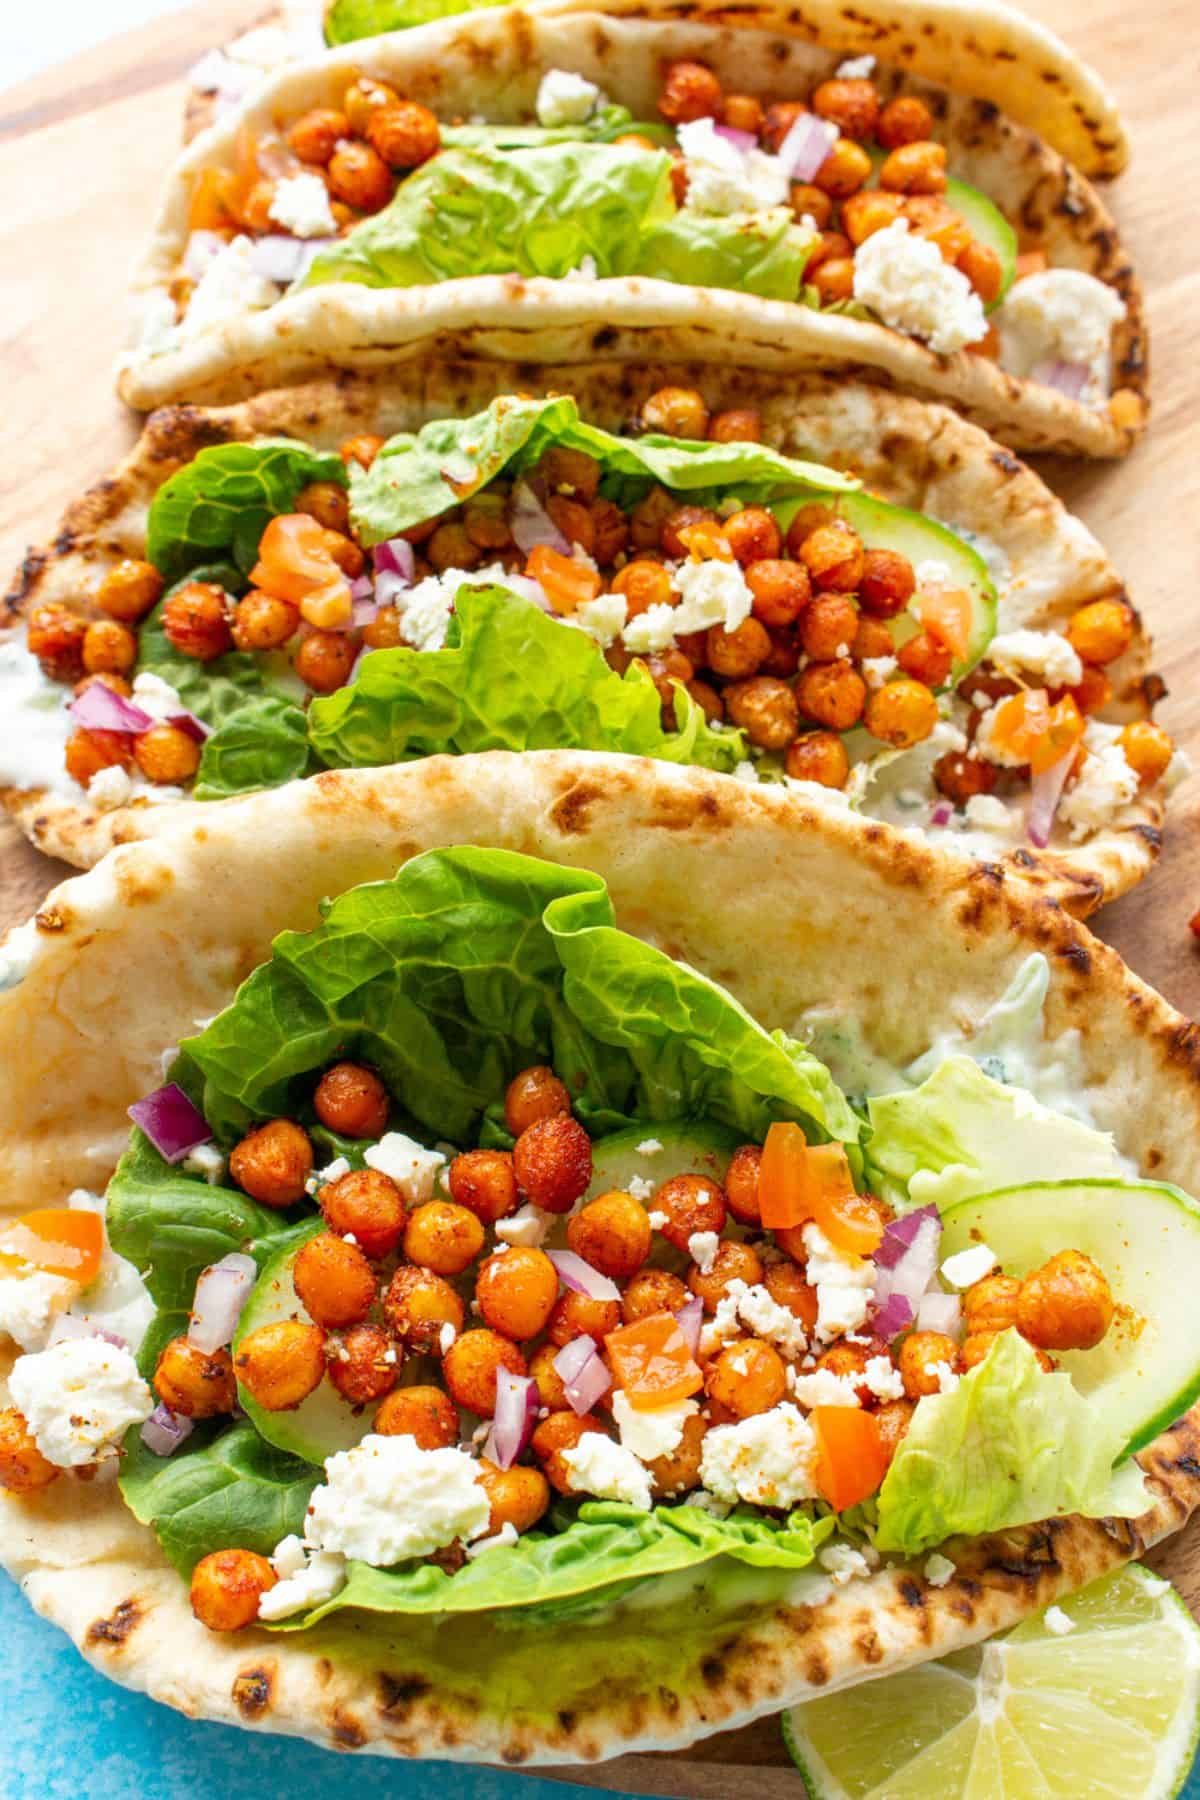 Overhead shot of 4 flat breads on a wooden board filled with roasted chickpeas, feta, red onion, lettuce and yogurt.